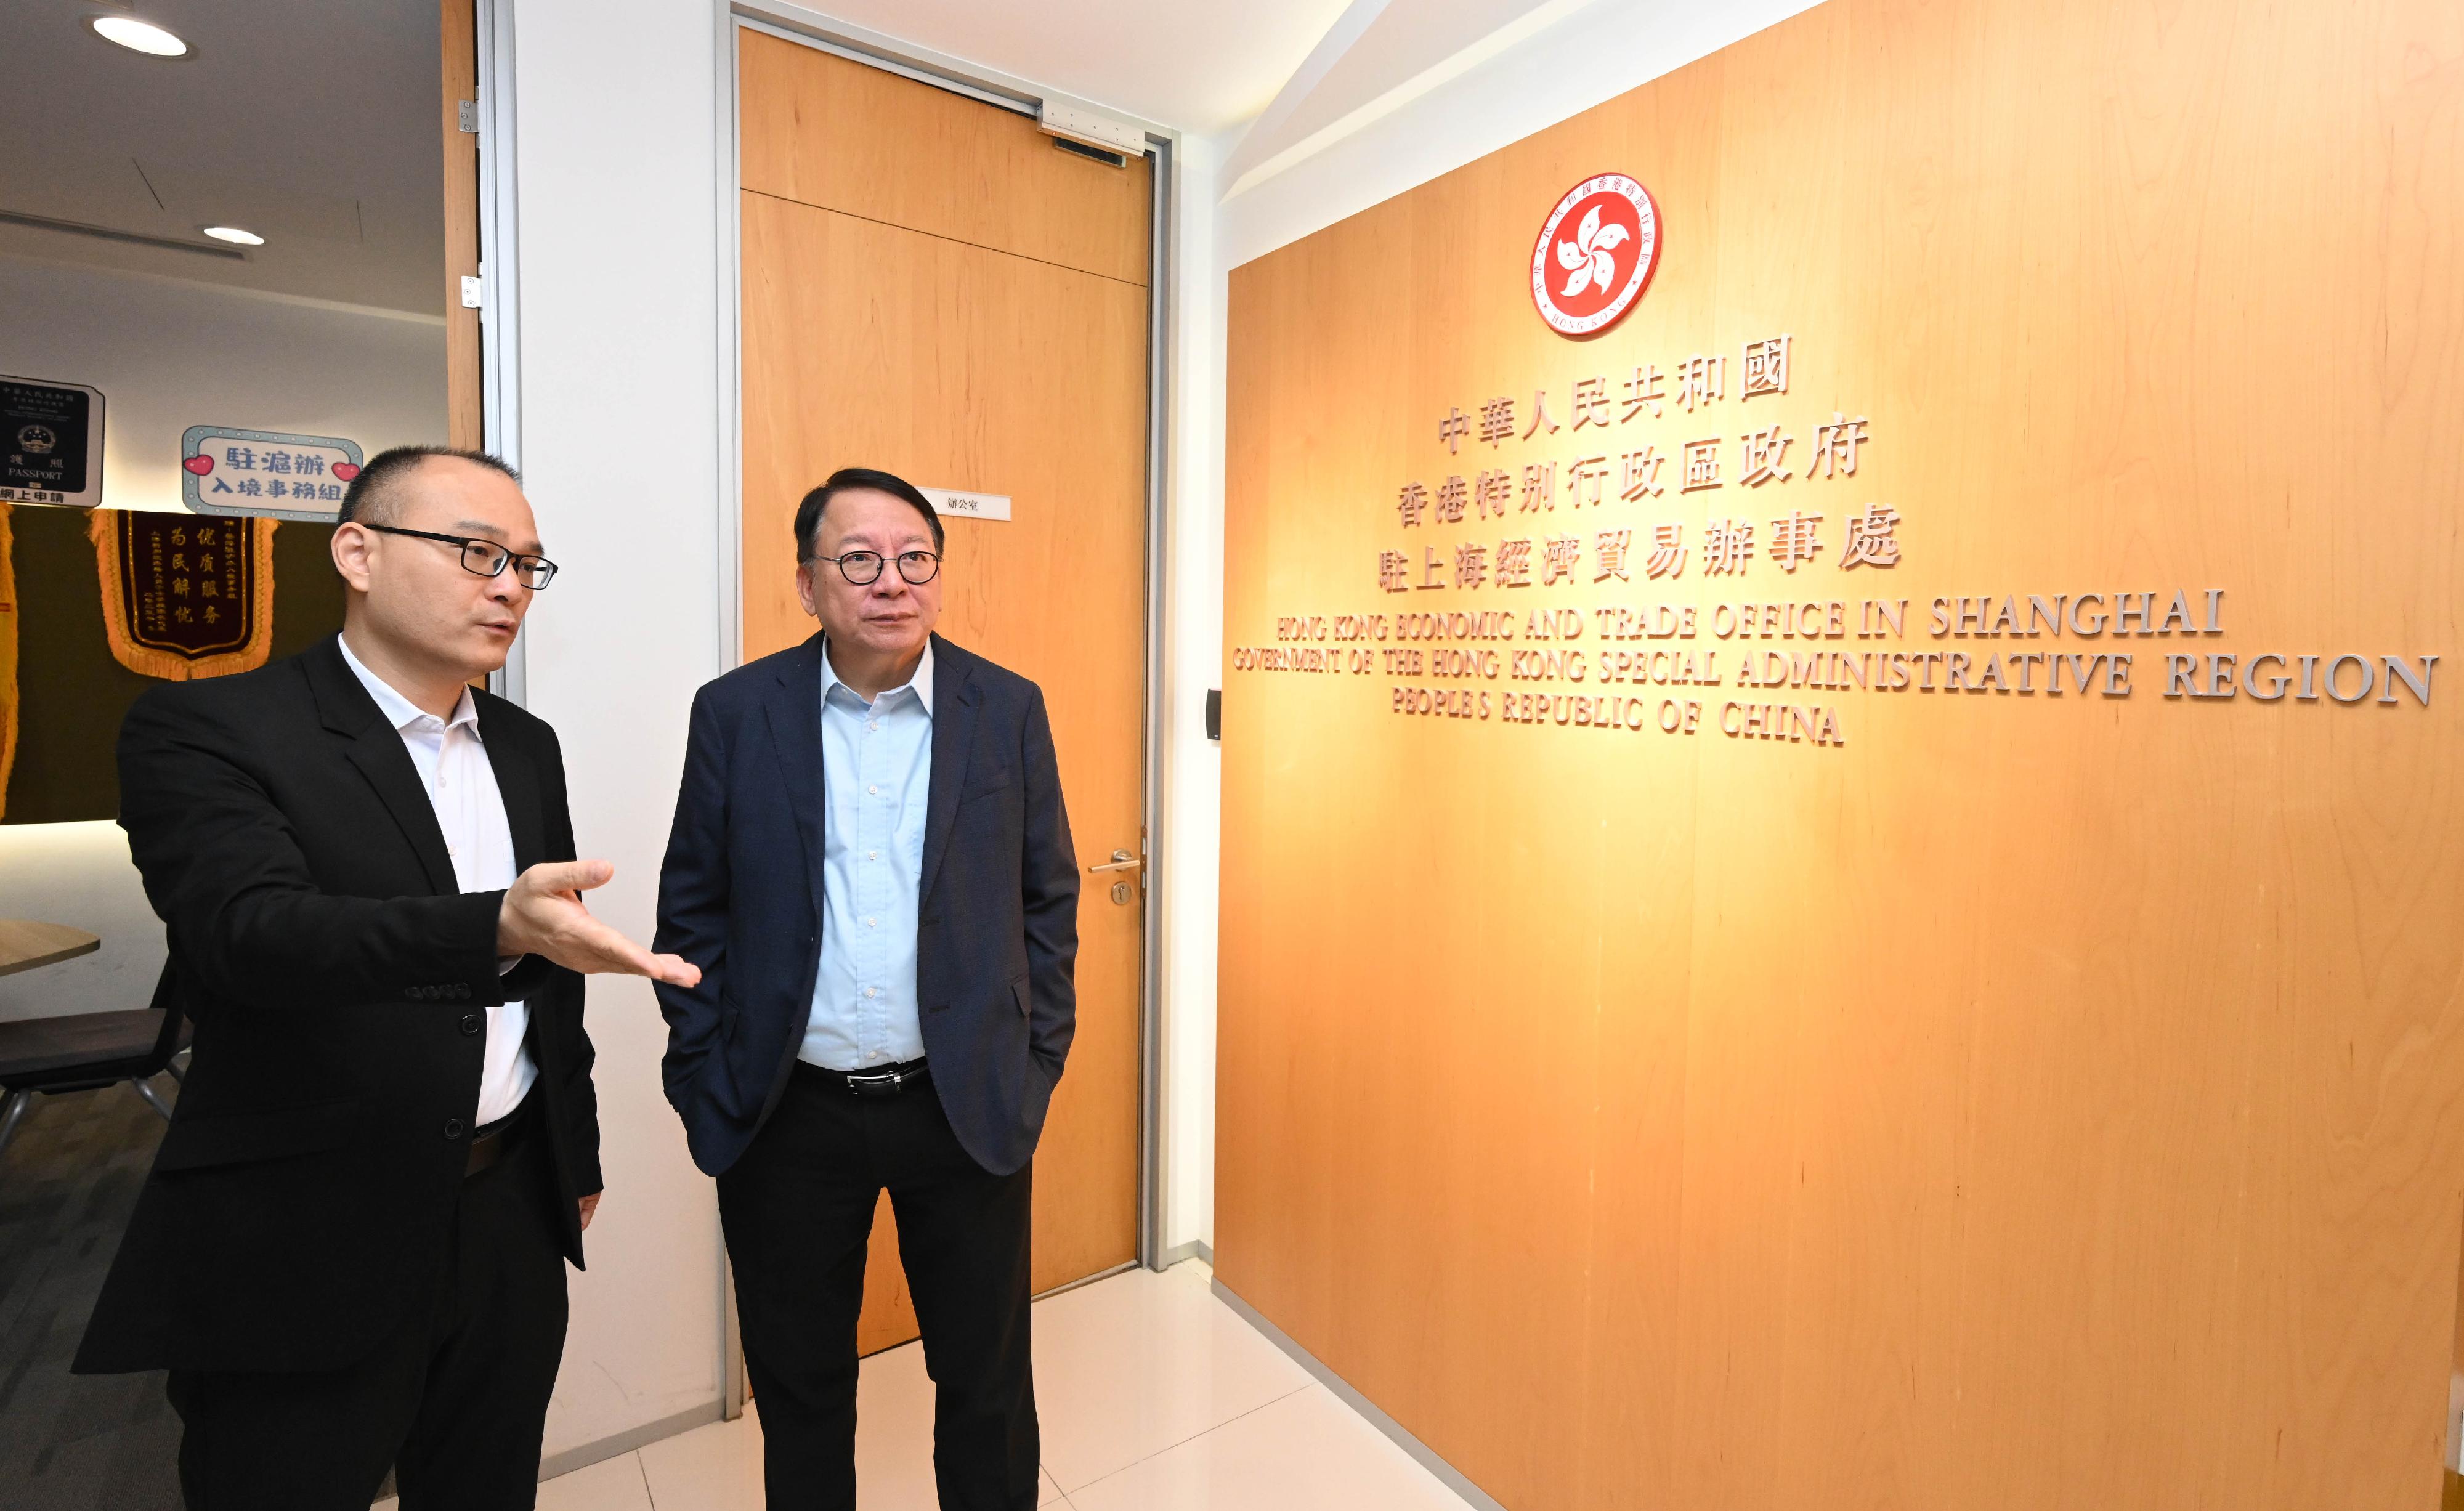 The Chief Secretary for Administration, Mr Chan Kwok-ki, visited Shanghai today (June 25). Photo shows Mr Chan (right) visiting the Hong Kong Economic and Trade Office in Shanghai (SHETO) and knowing more about the work of the Immigration Division of the SHETO.